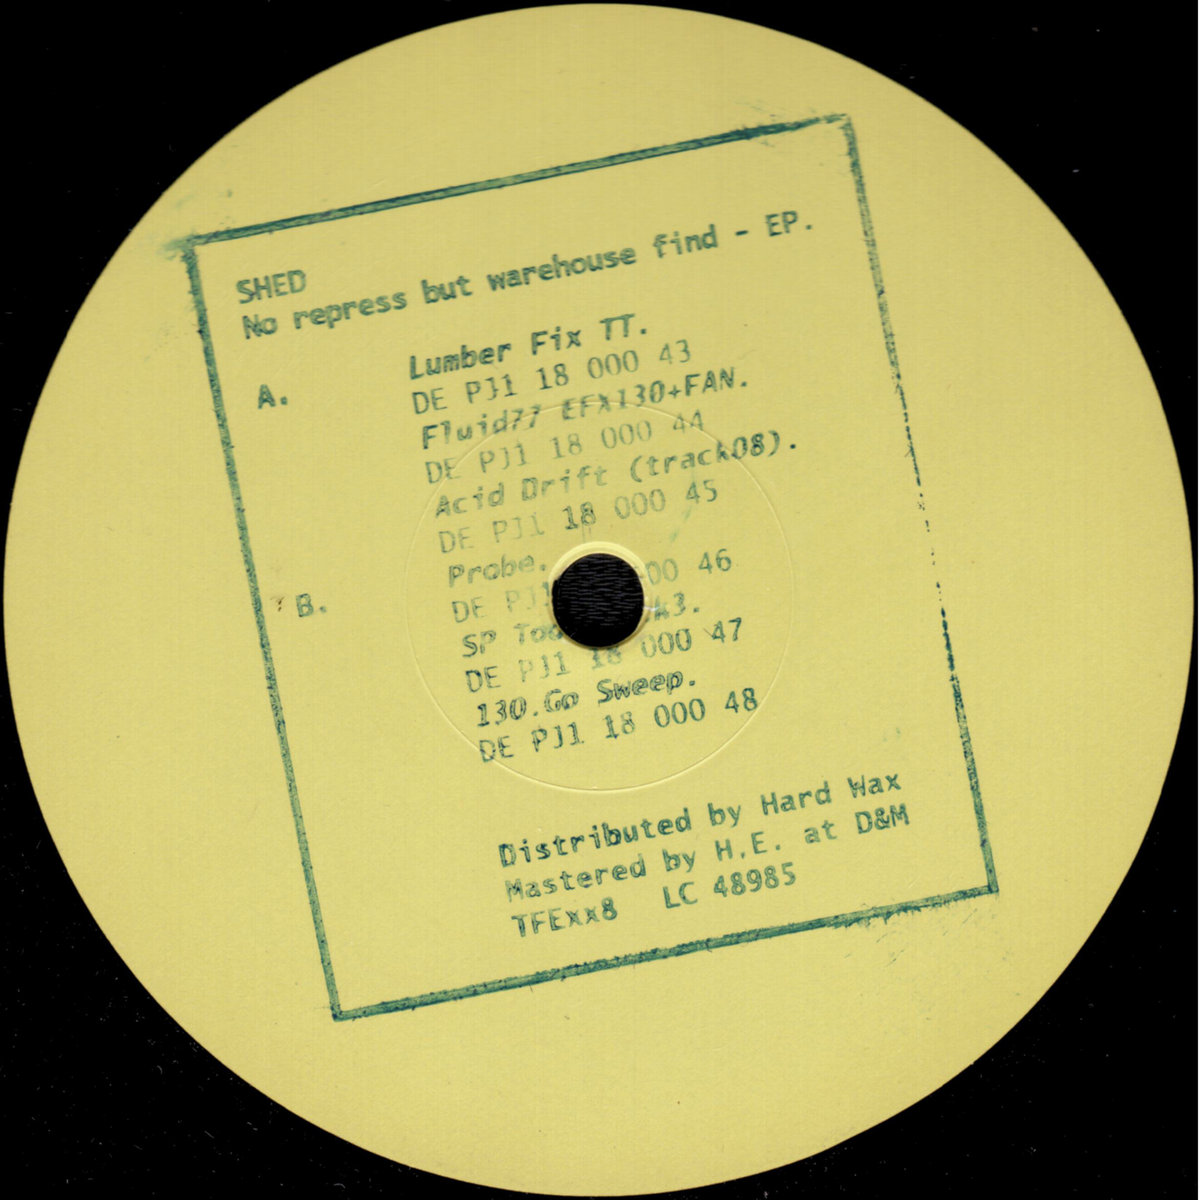 image cover: Shed - No Repress But Warehouse Find Ep /